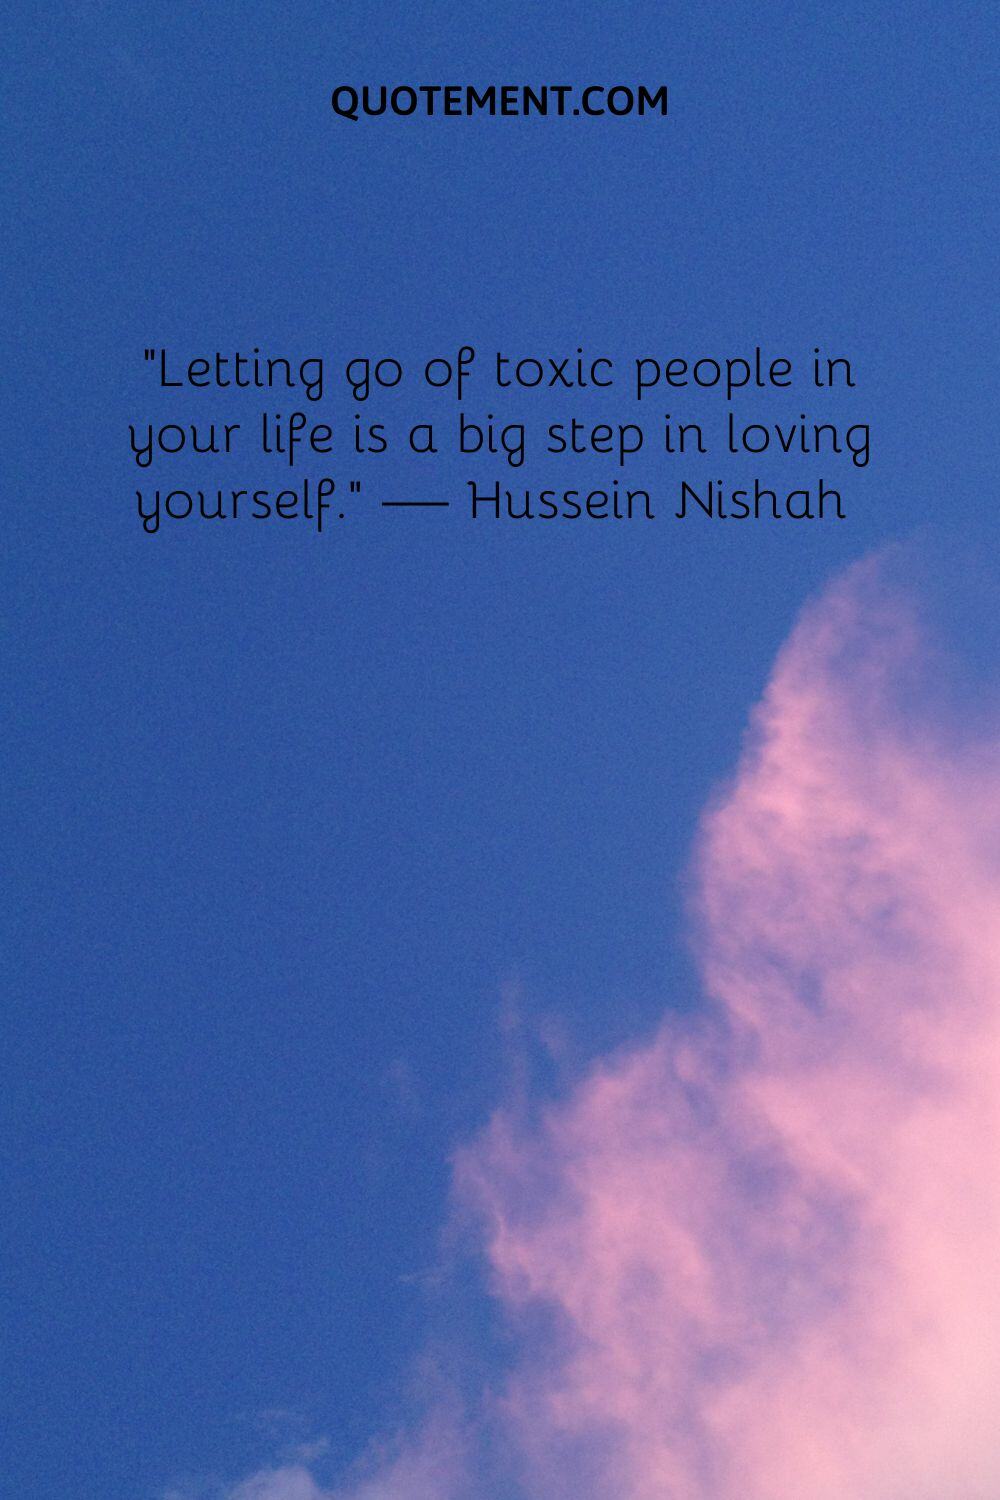 Letting go of toxic people in your life is a big step in loving yourself